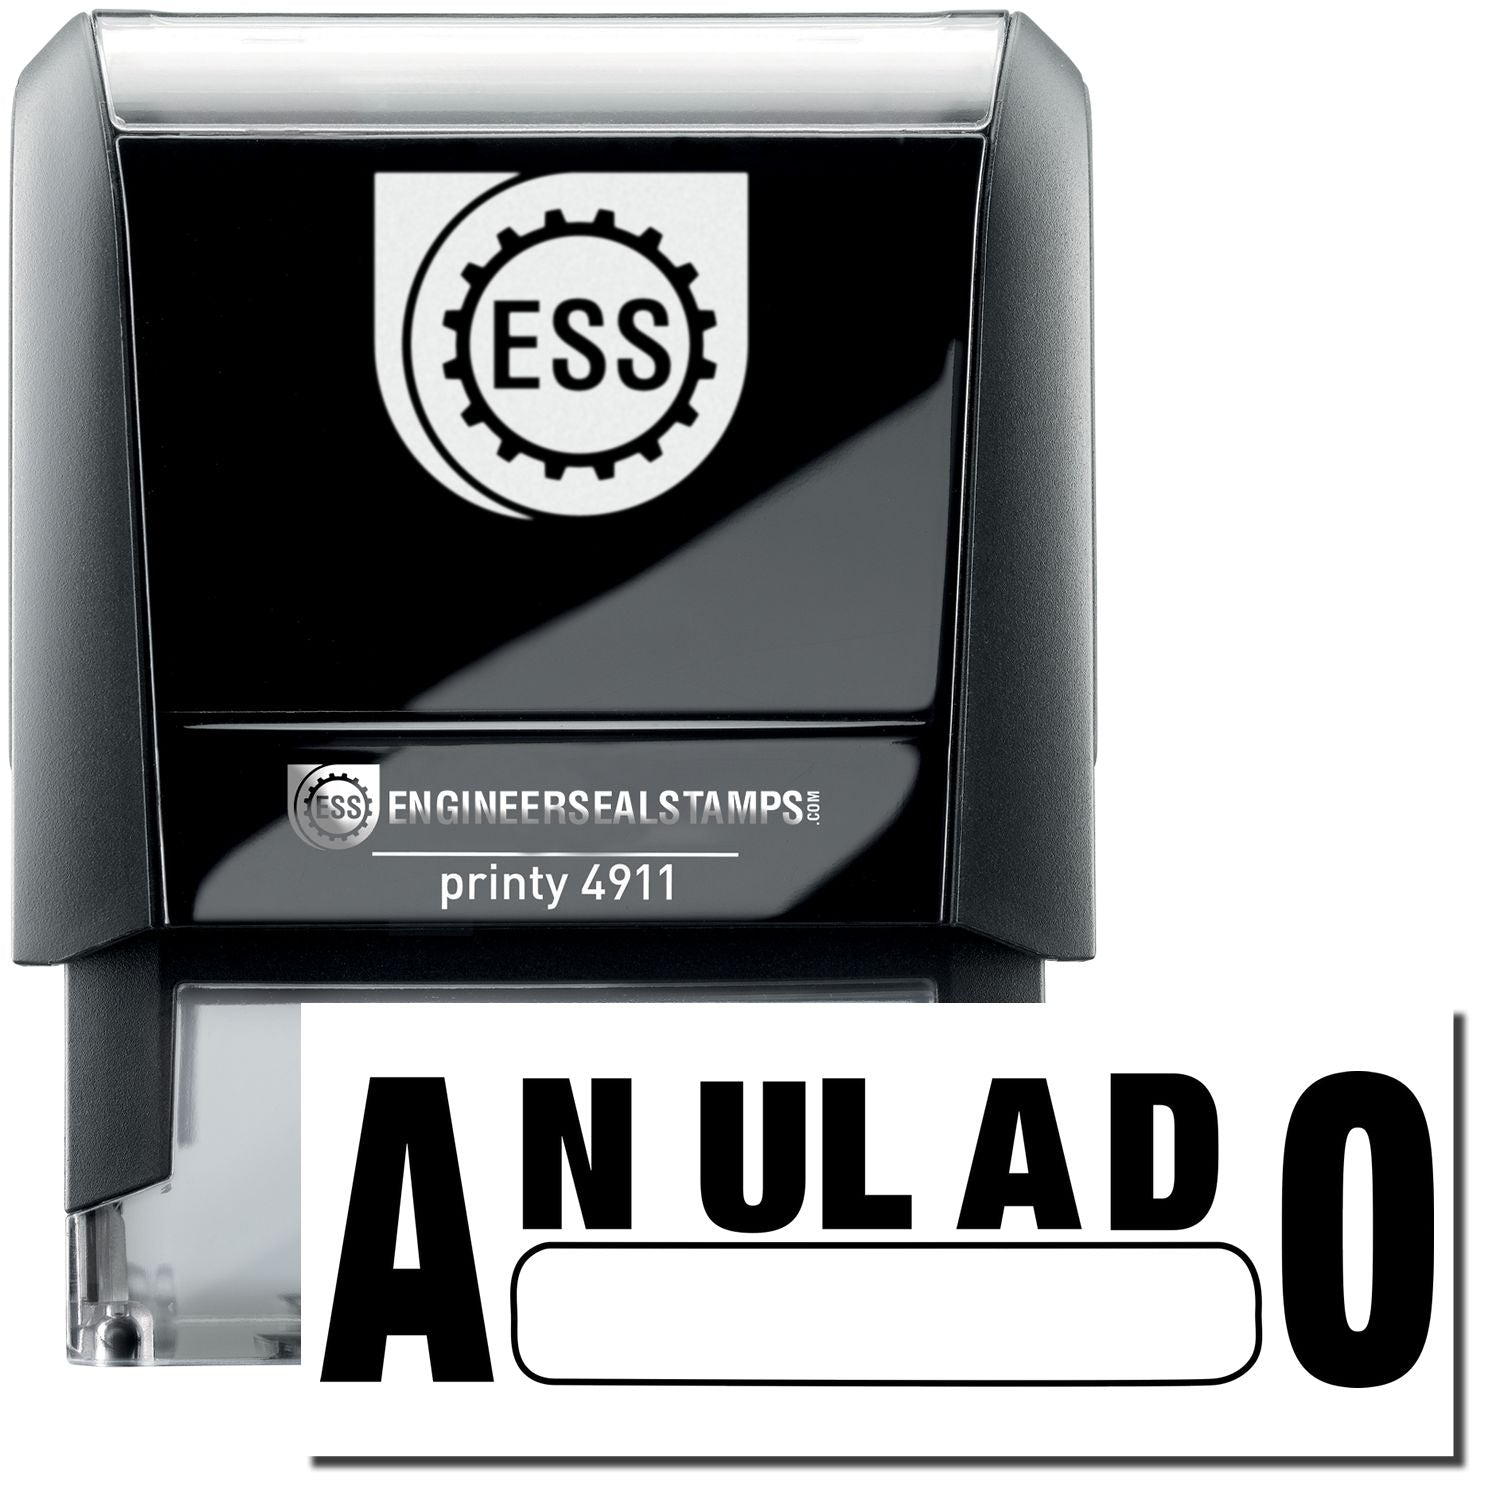 A self-inking stamp with a stamped image showing how the text "ANULADO" with a box under it is displayed after stamping.